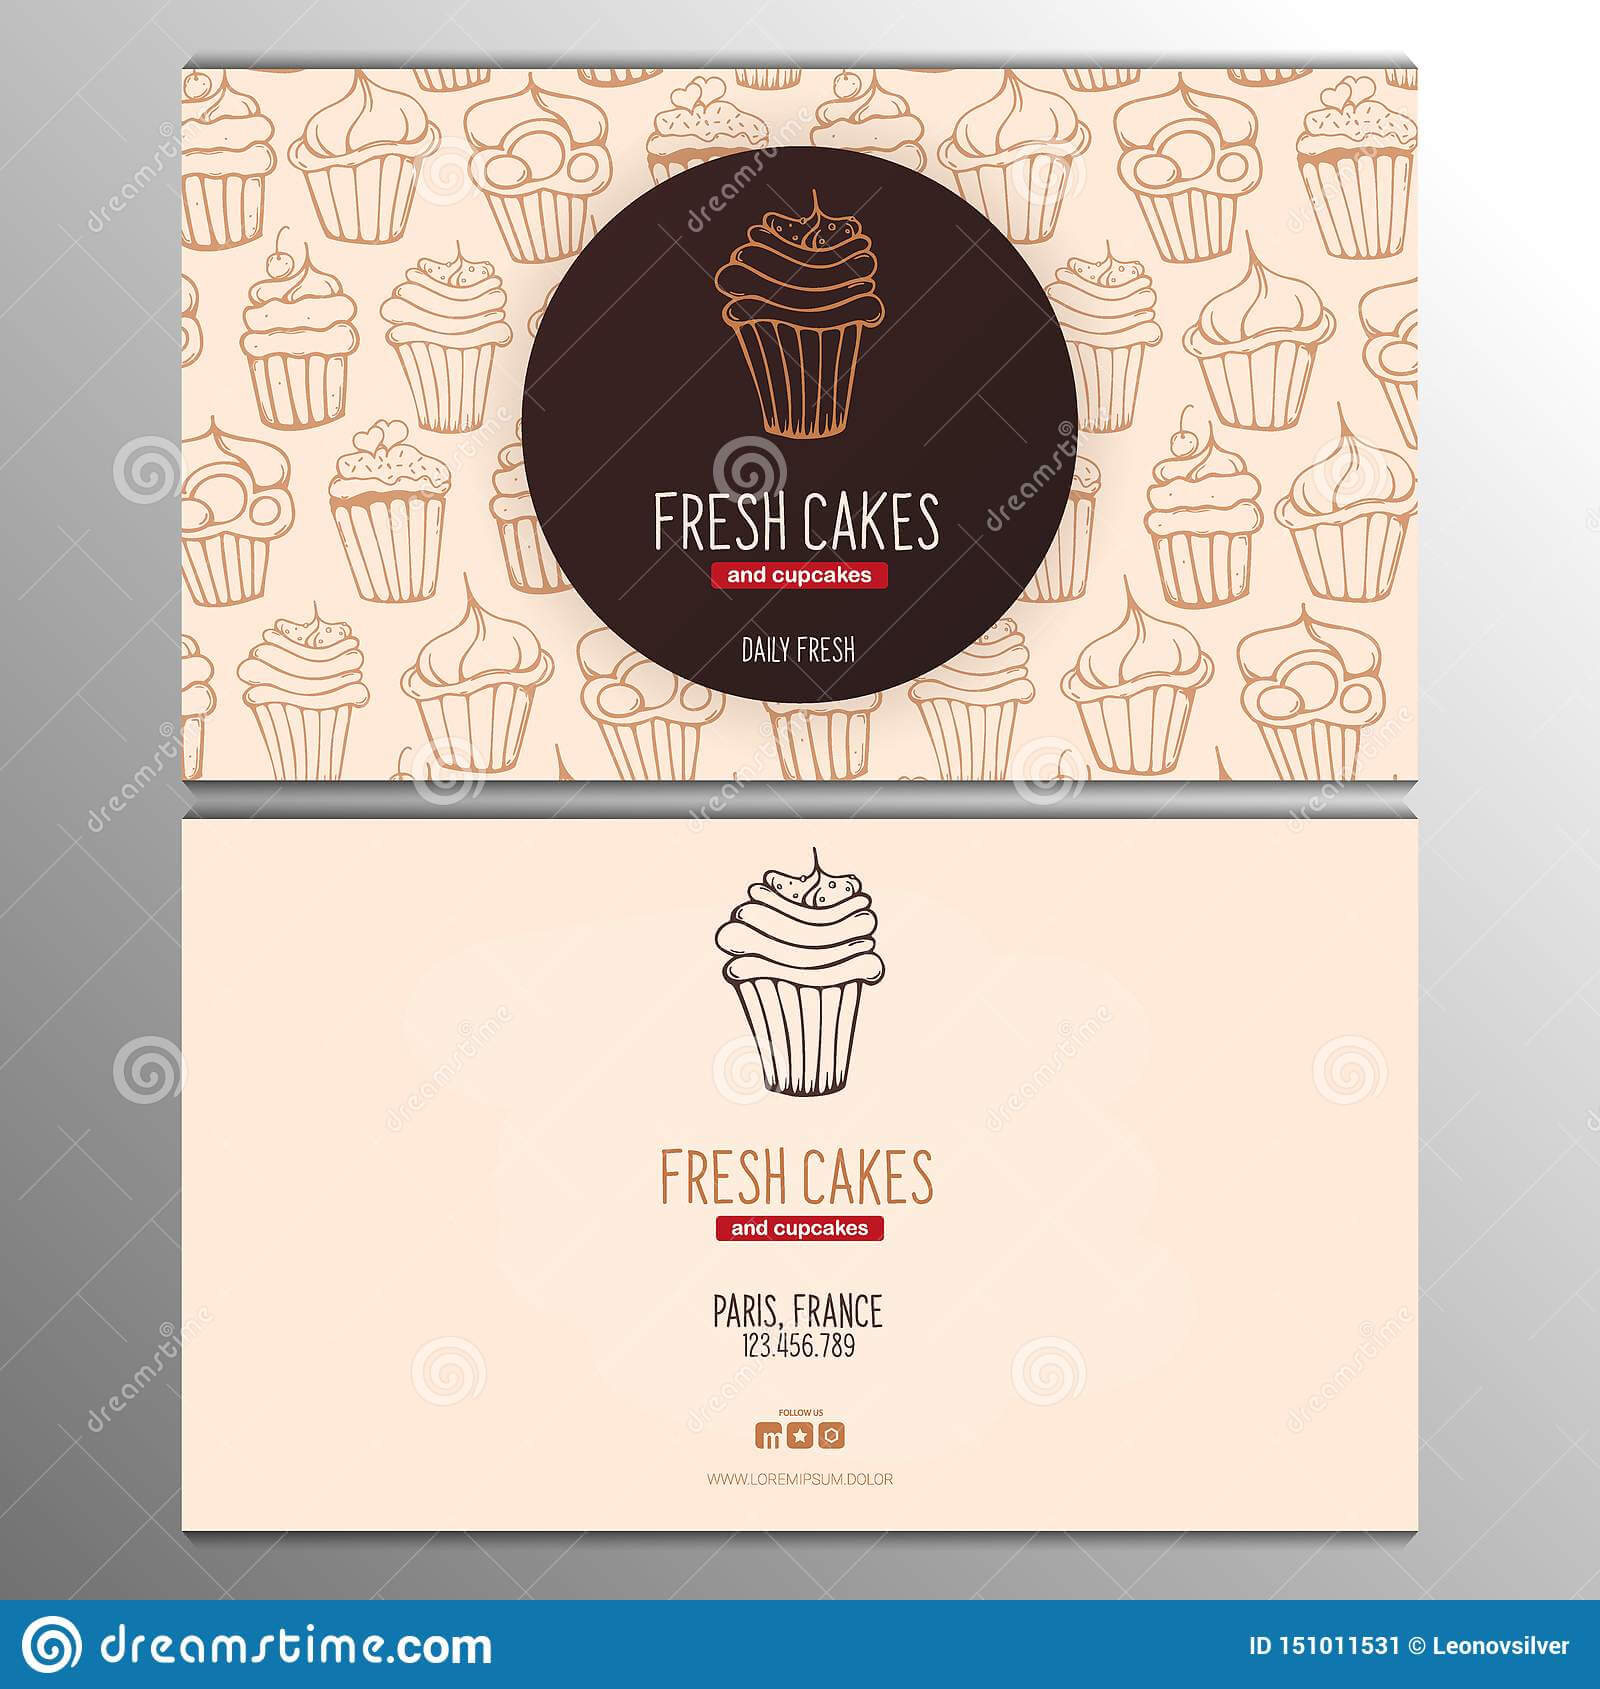 Cupcake Or Cake Business Card Template For Bakery Or Pastry Intended For Cake Business Cards Templates Free